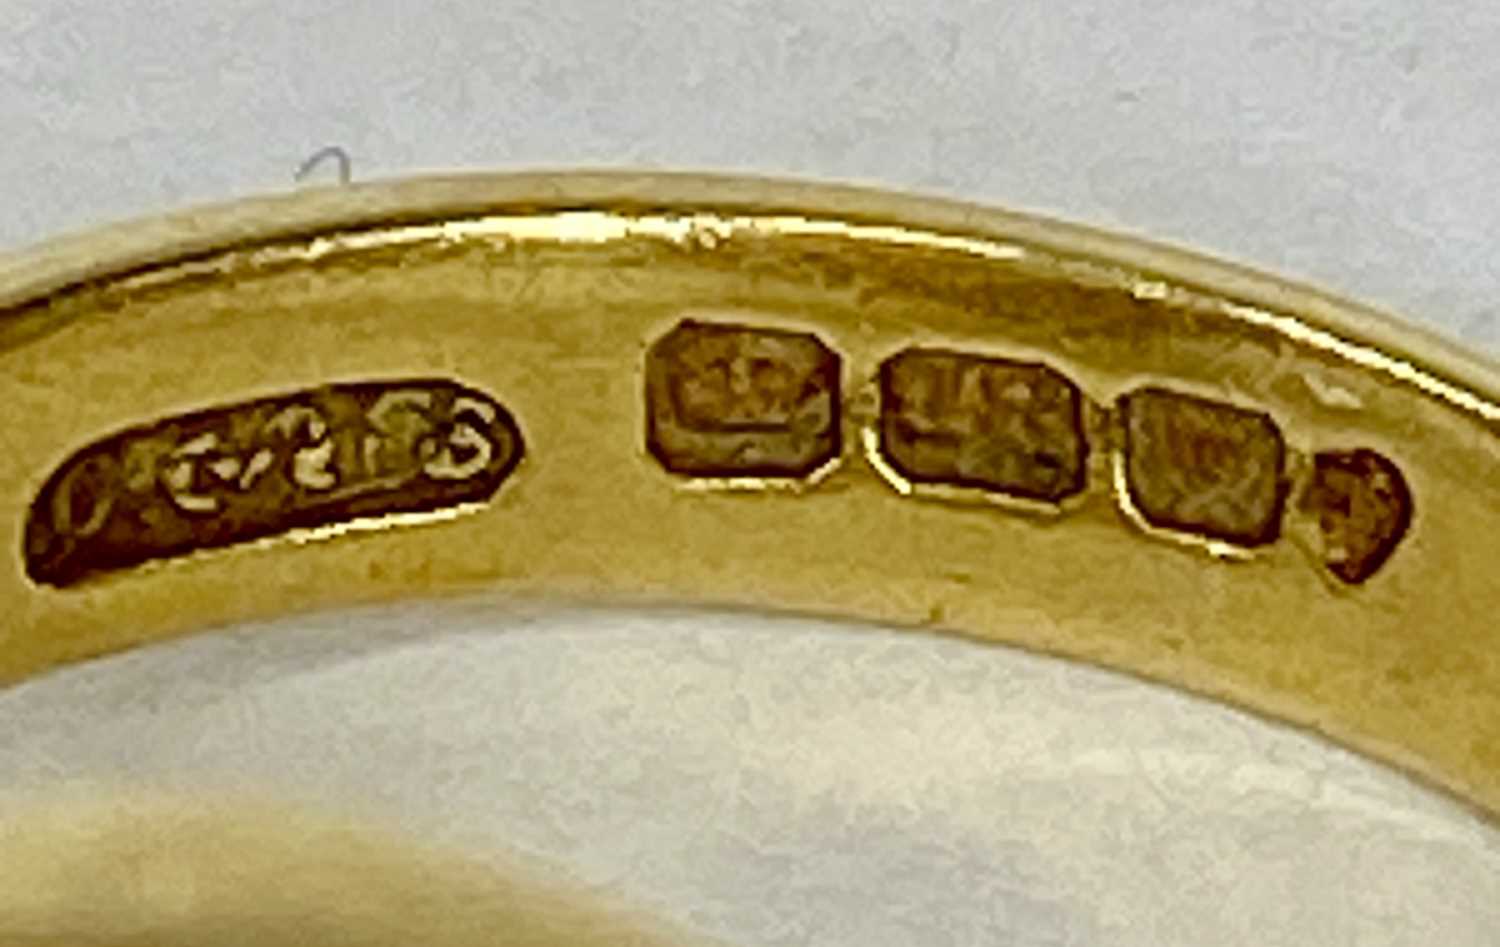 18CT GOLD SIGNET RING, engraved with crest, size M-N, 10.7gms Provenance: private collection Ynys - Image 4 of 4